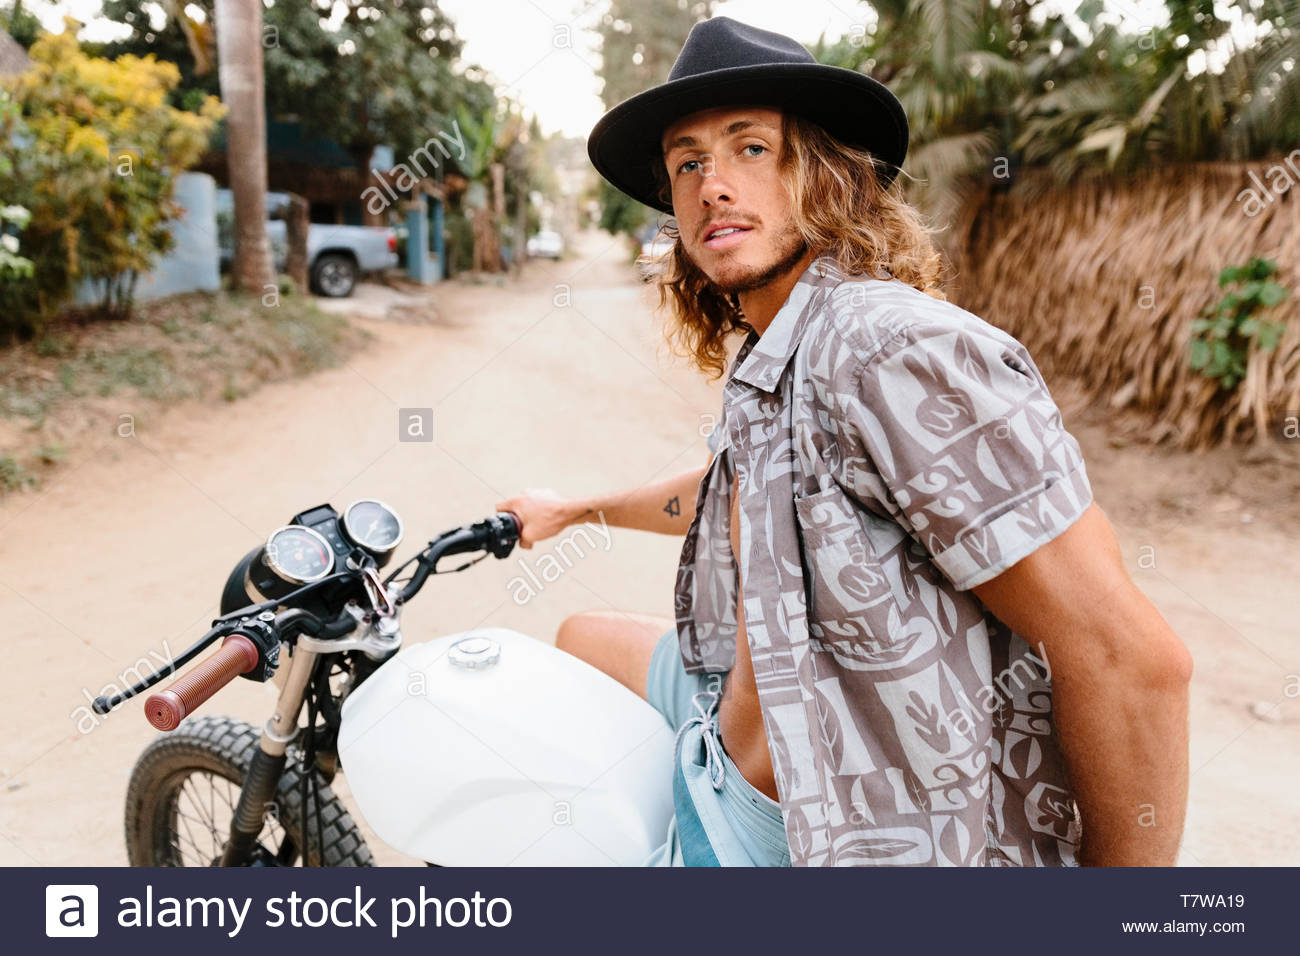 Portrait confident, cool young man riding motorcycle on dirt road, Mexico Stock Photo